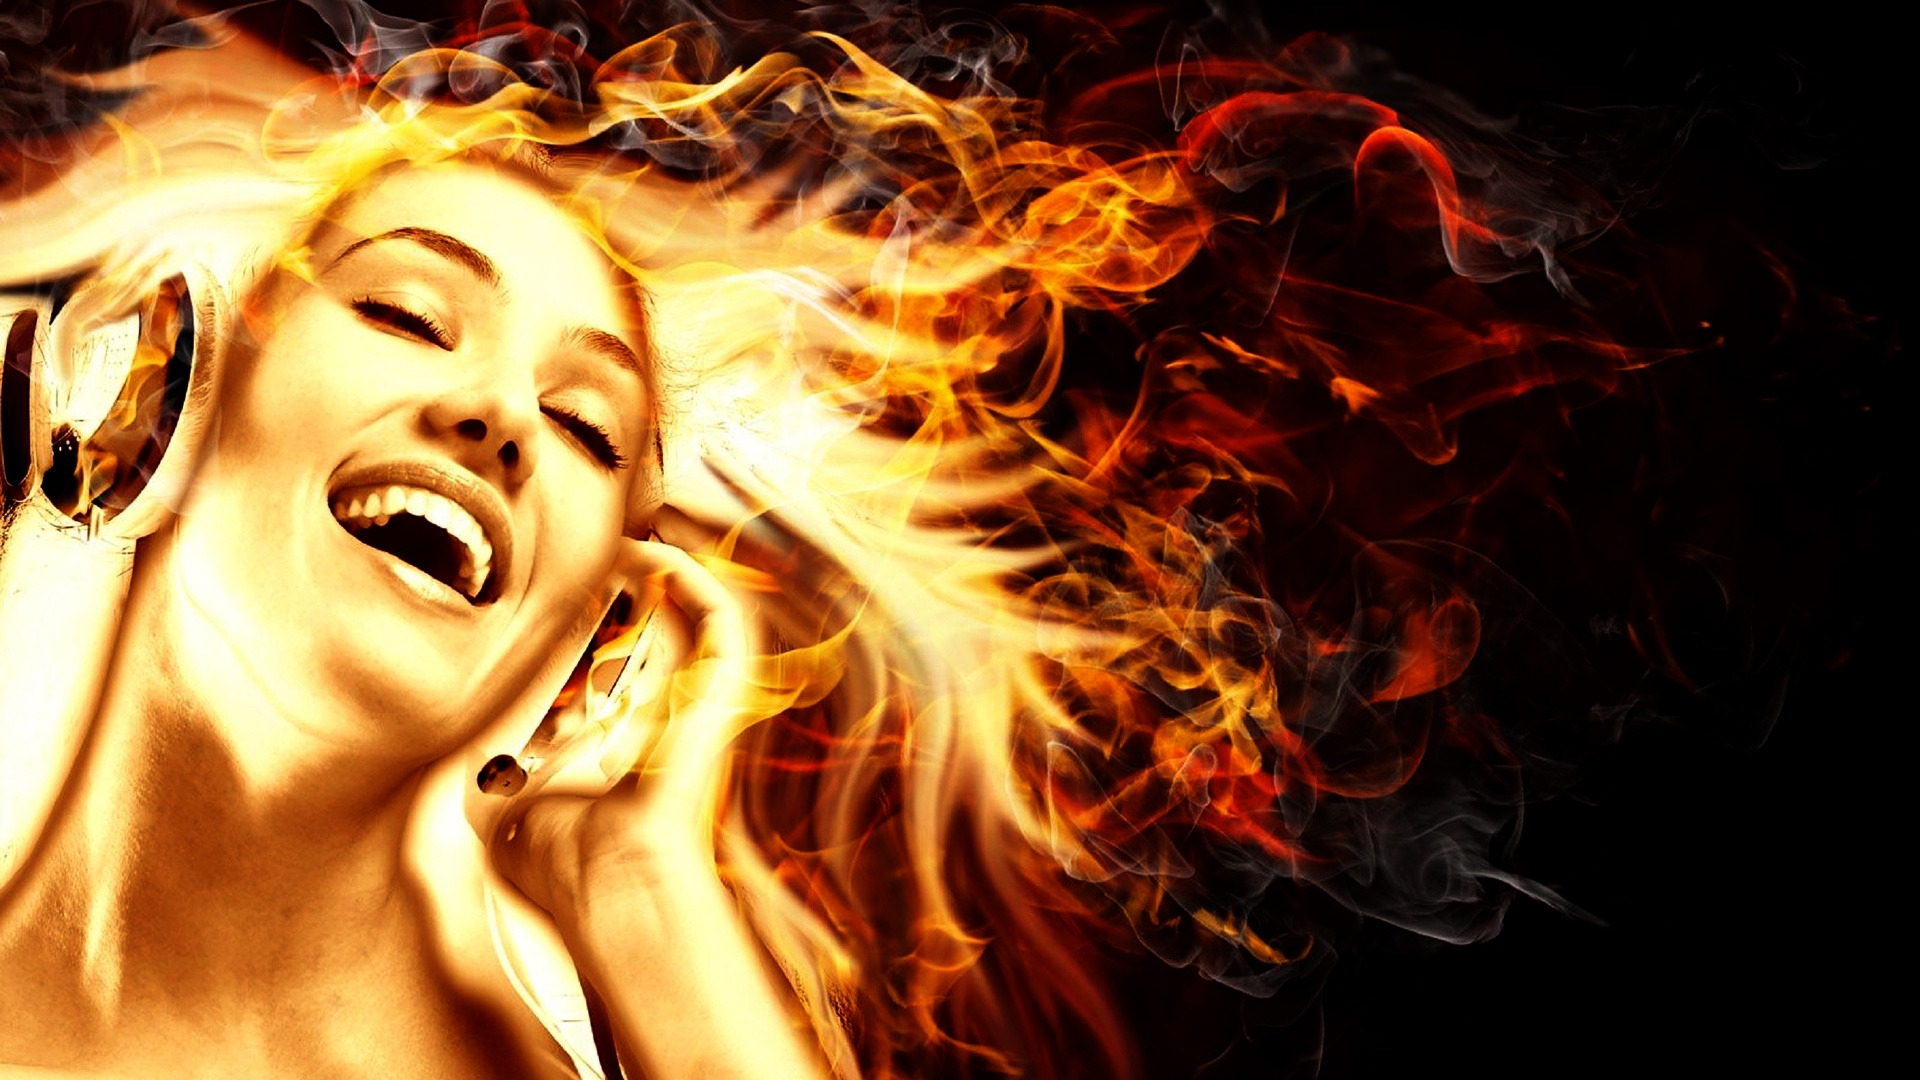 Music in Fire for 1920 x 1080 HDTV 1080p resolution